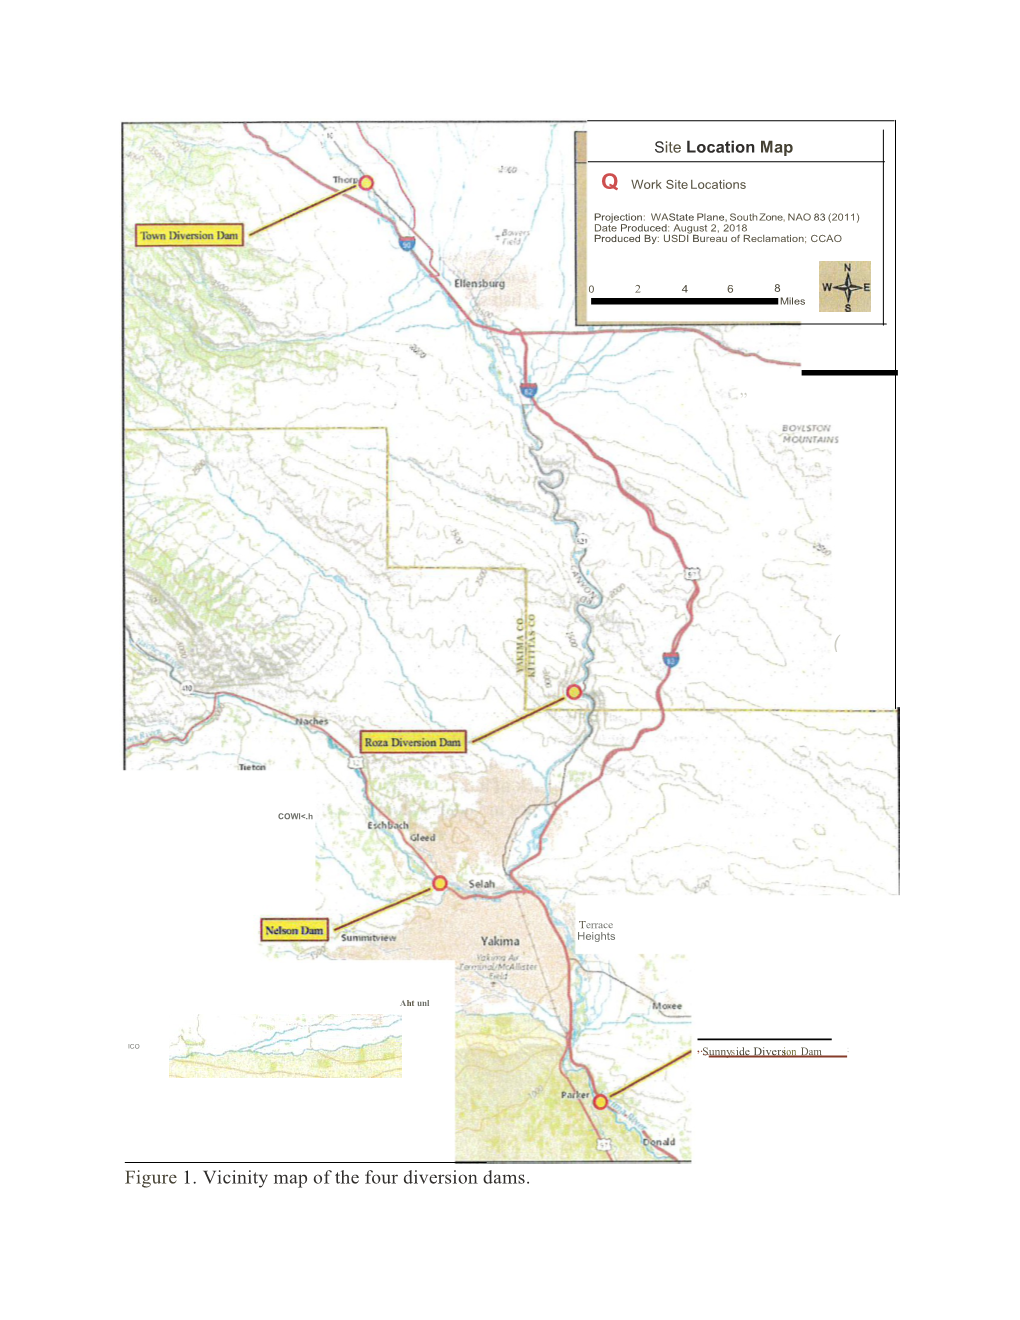 Figure 1. Vicinity Map of the Four Diversion Dams